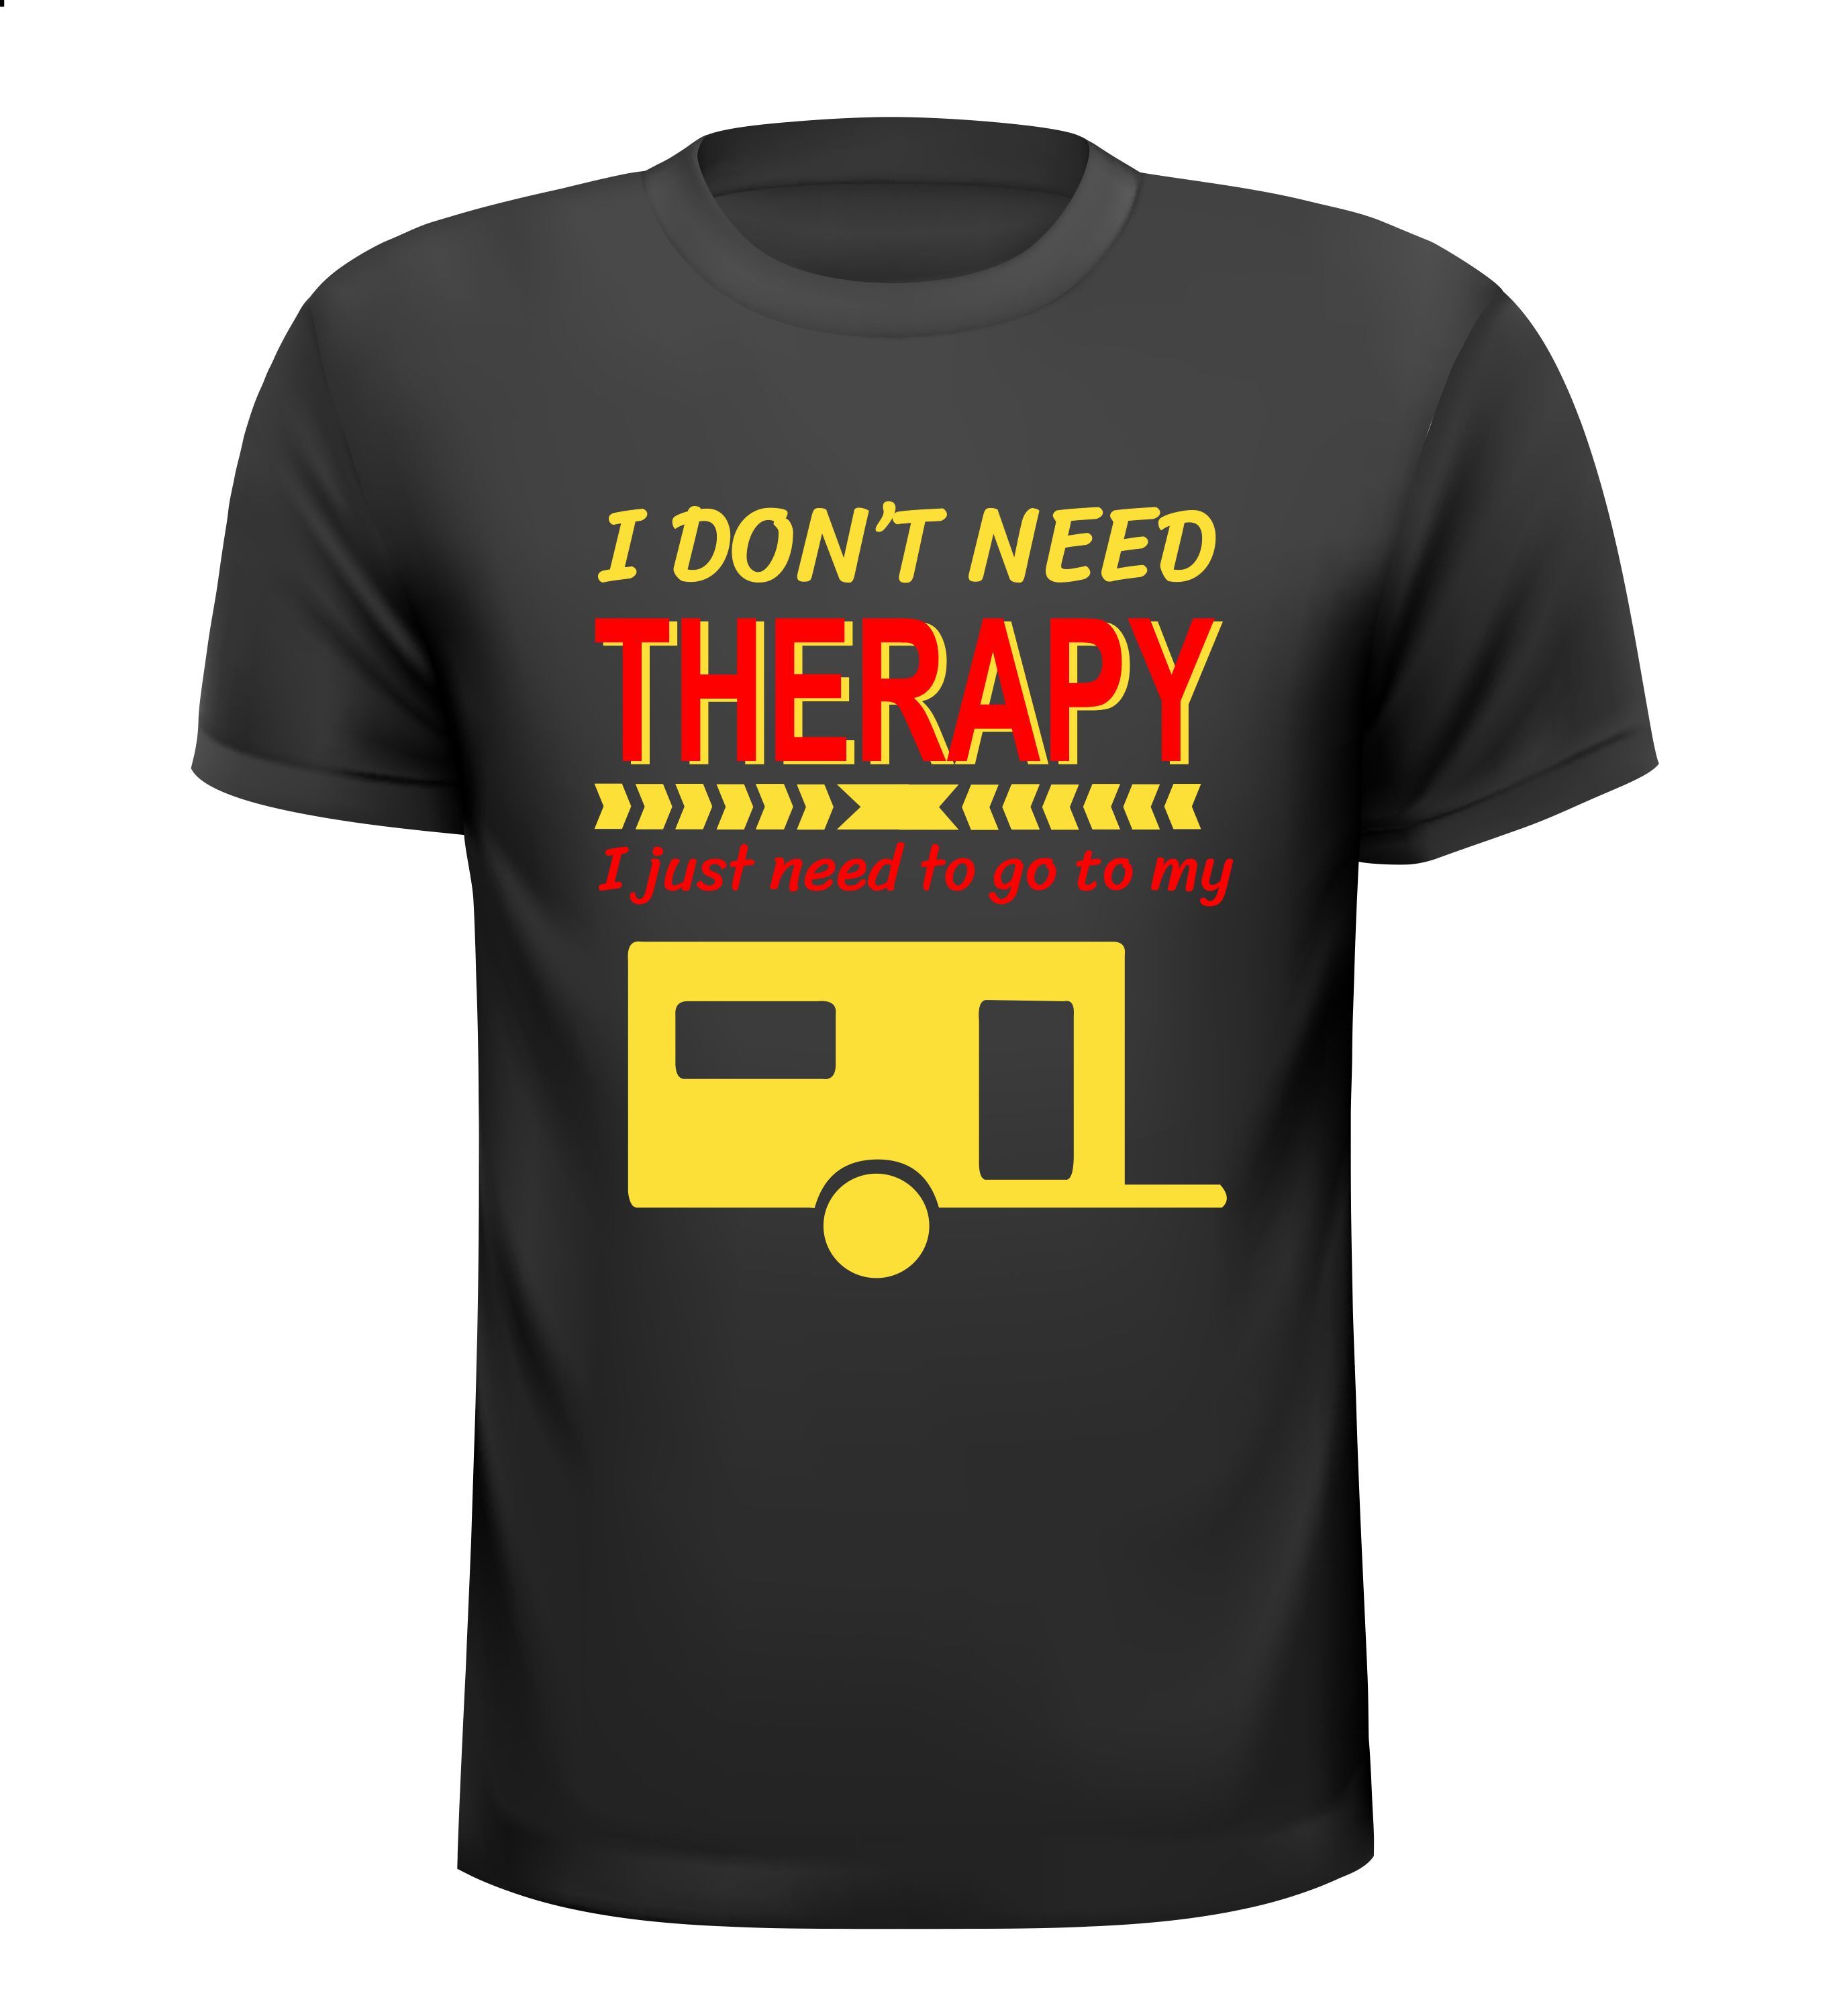 Caravan T-shirt I don't need therapy, I just need to go to my caravan